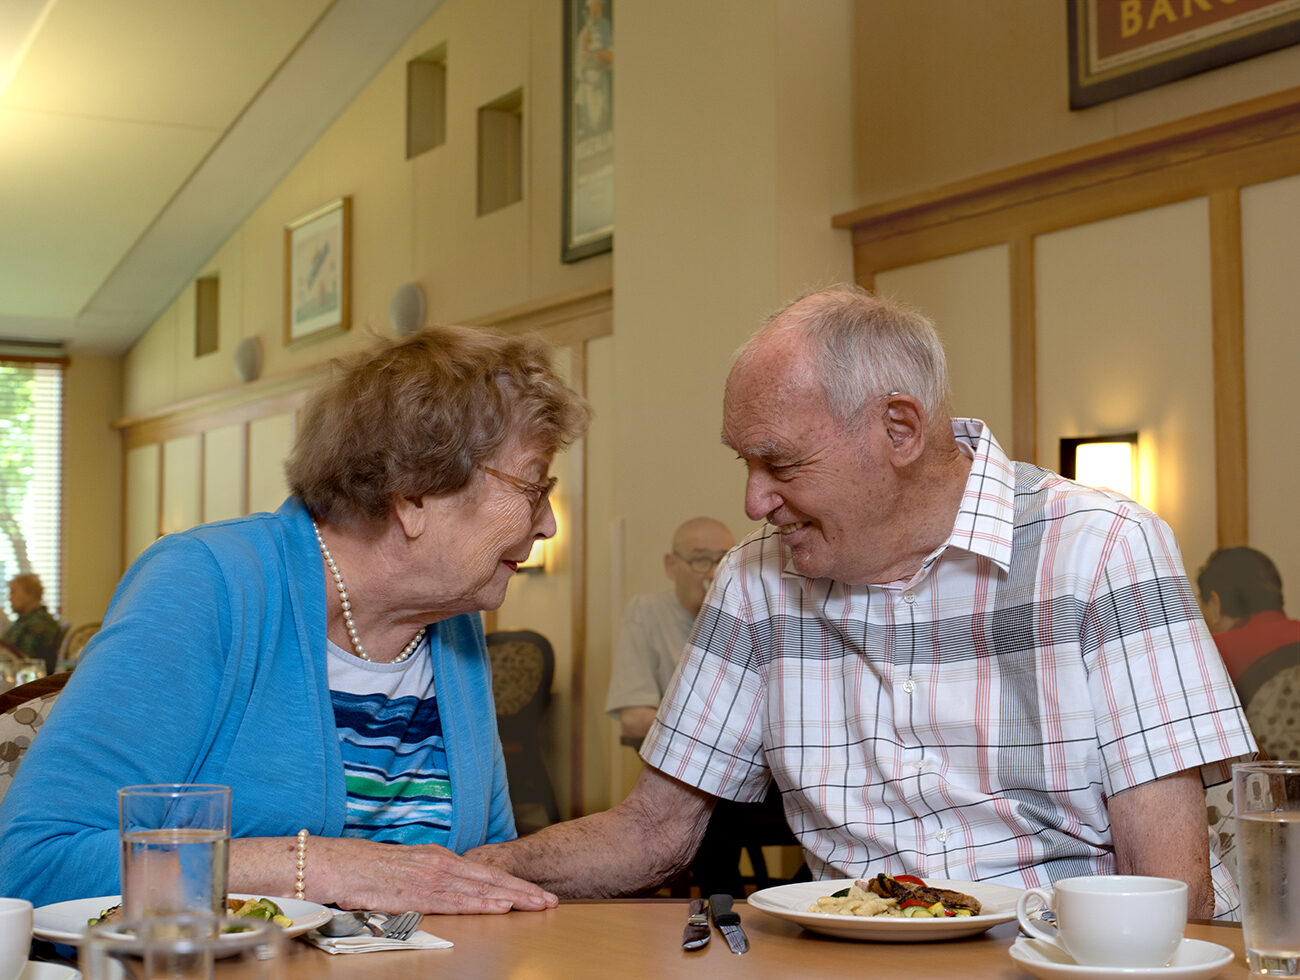 Assisted Living for Couples at Central Baptist Village in Norridge, IL.